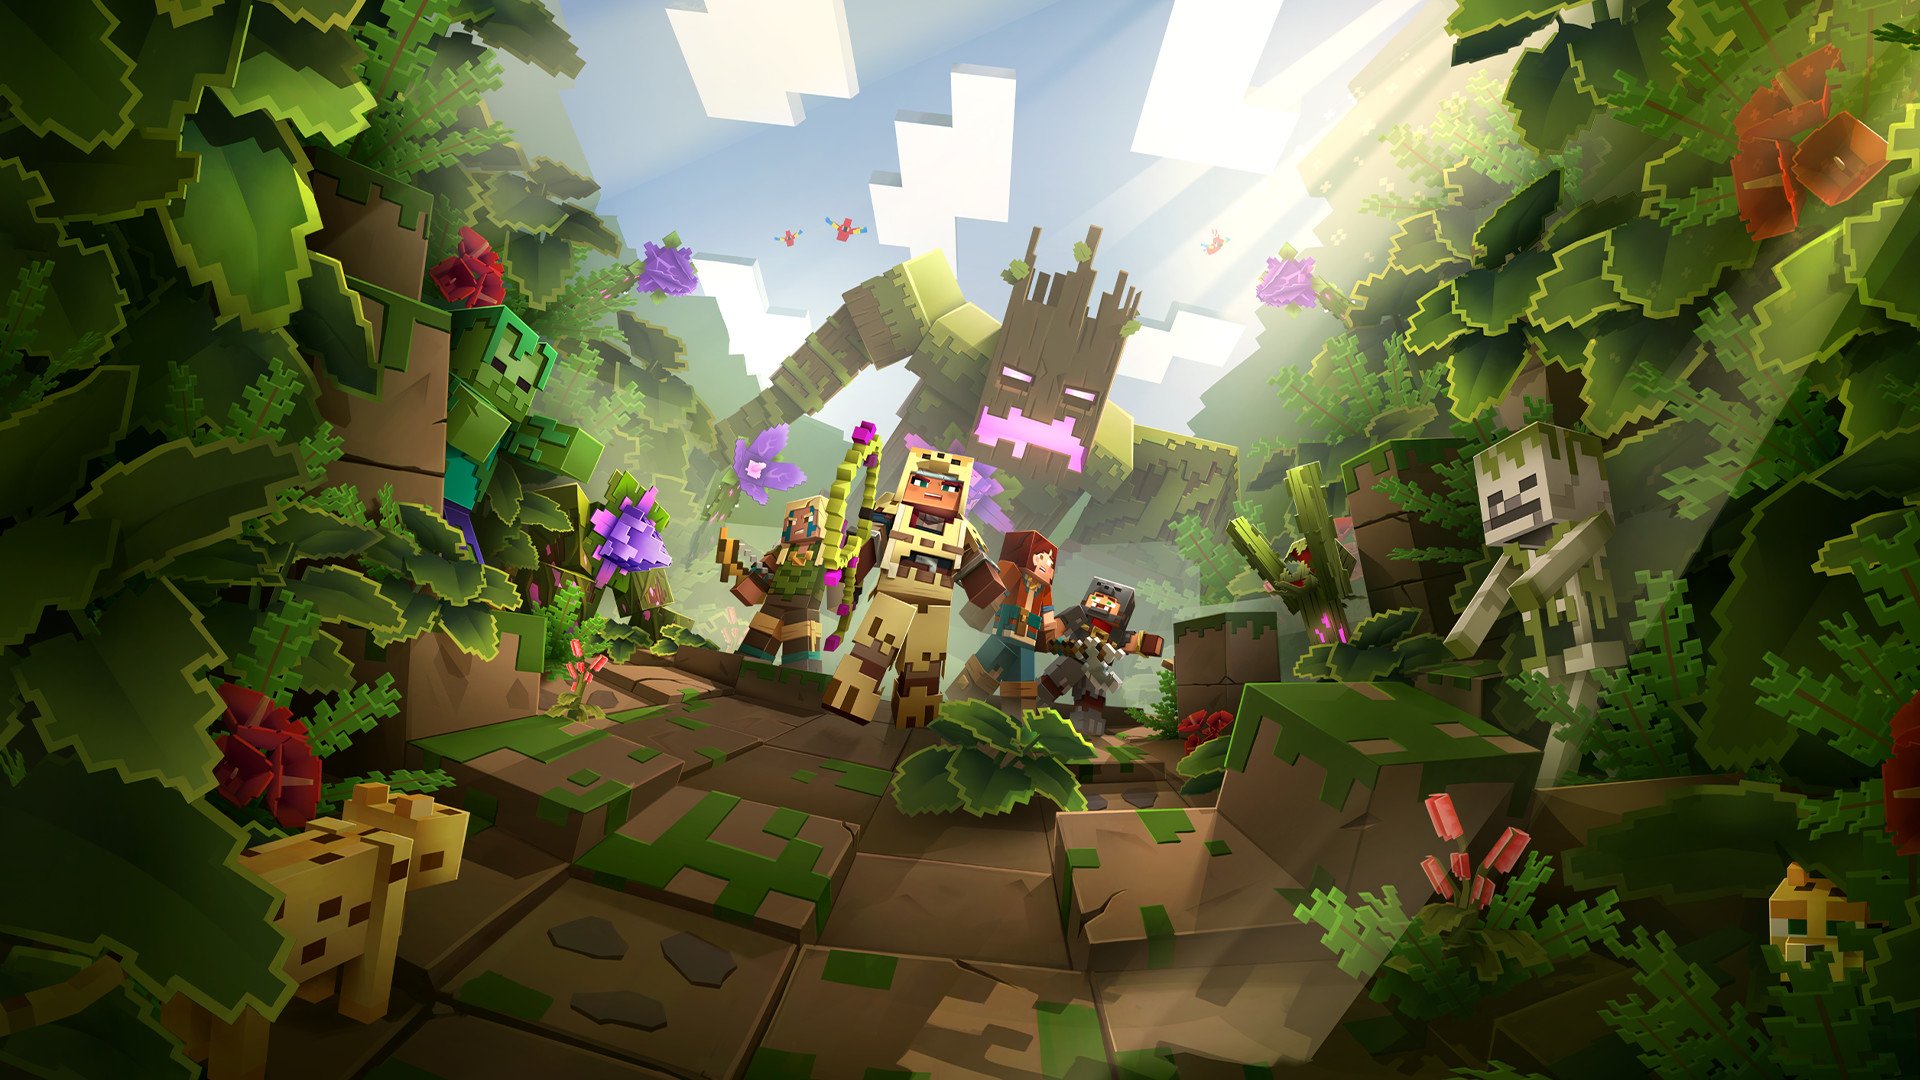 Minecraft Dungeons' first DLC, Jungle Awakens, planned for July